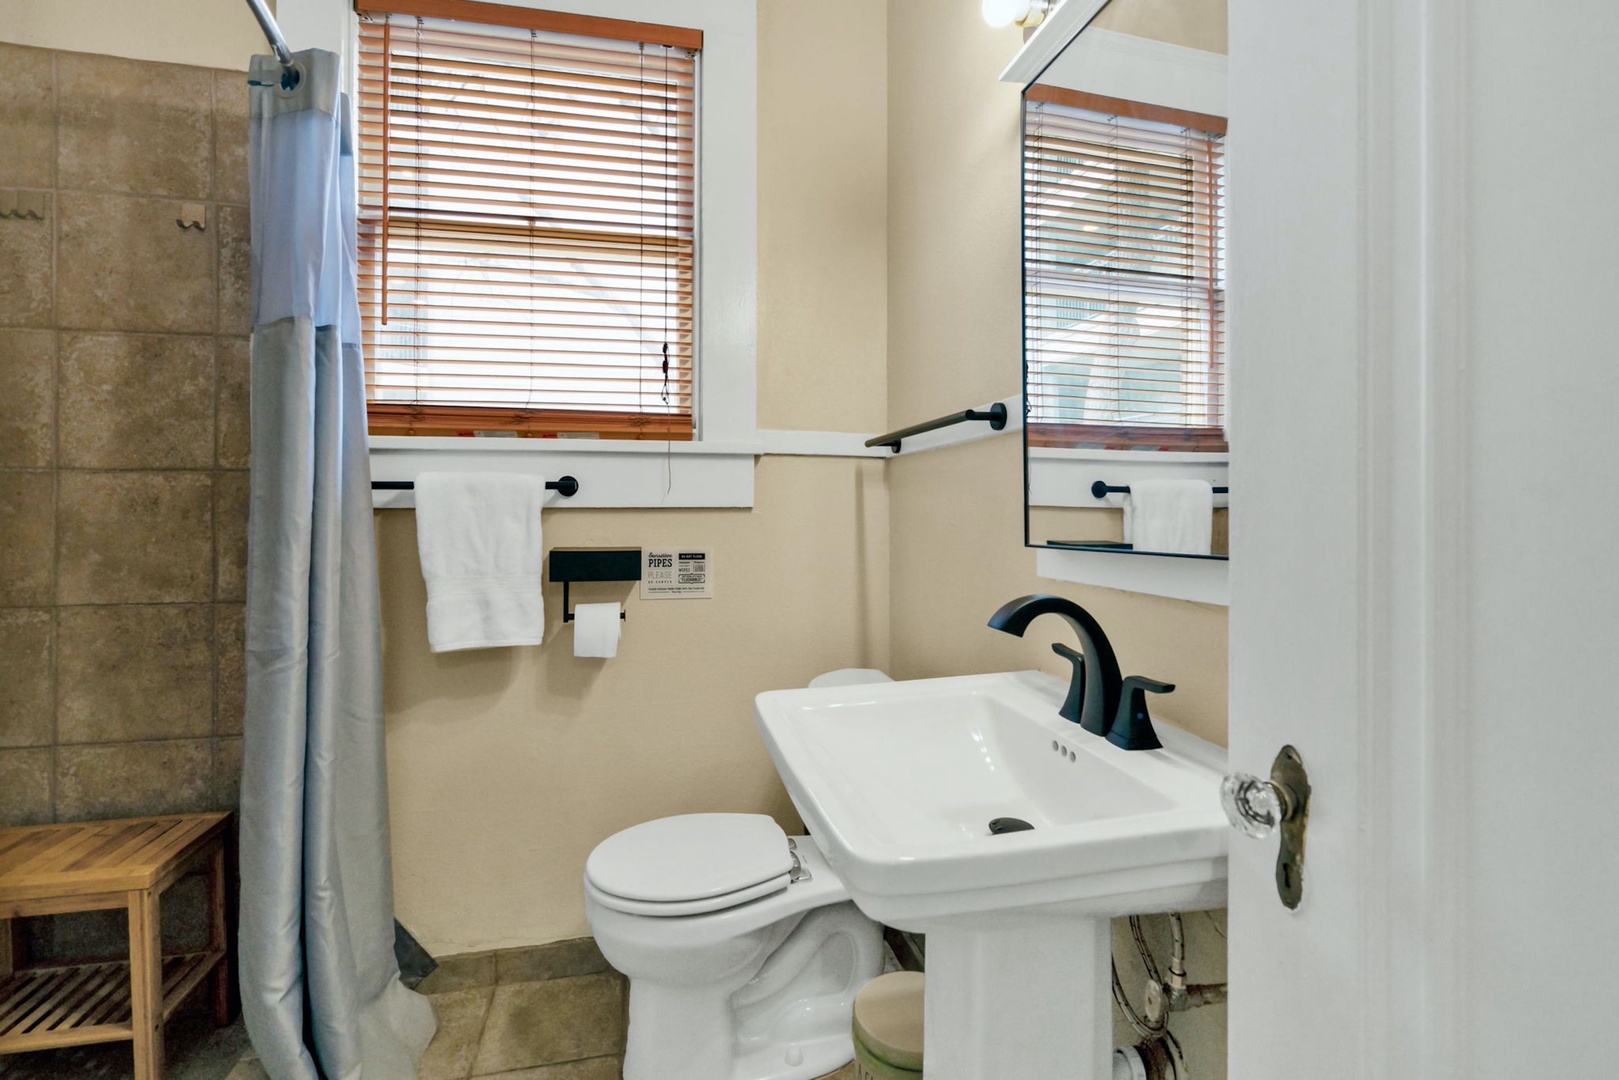 The full bathroom features a pedestal sink & walk-in shower